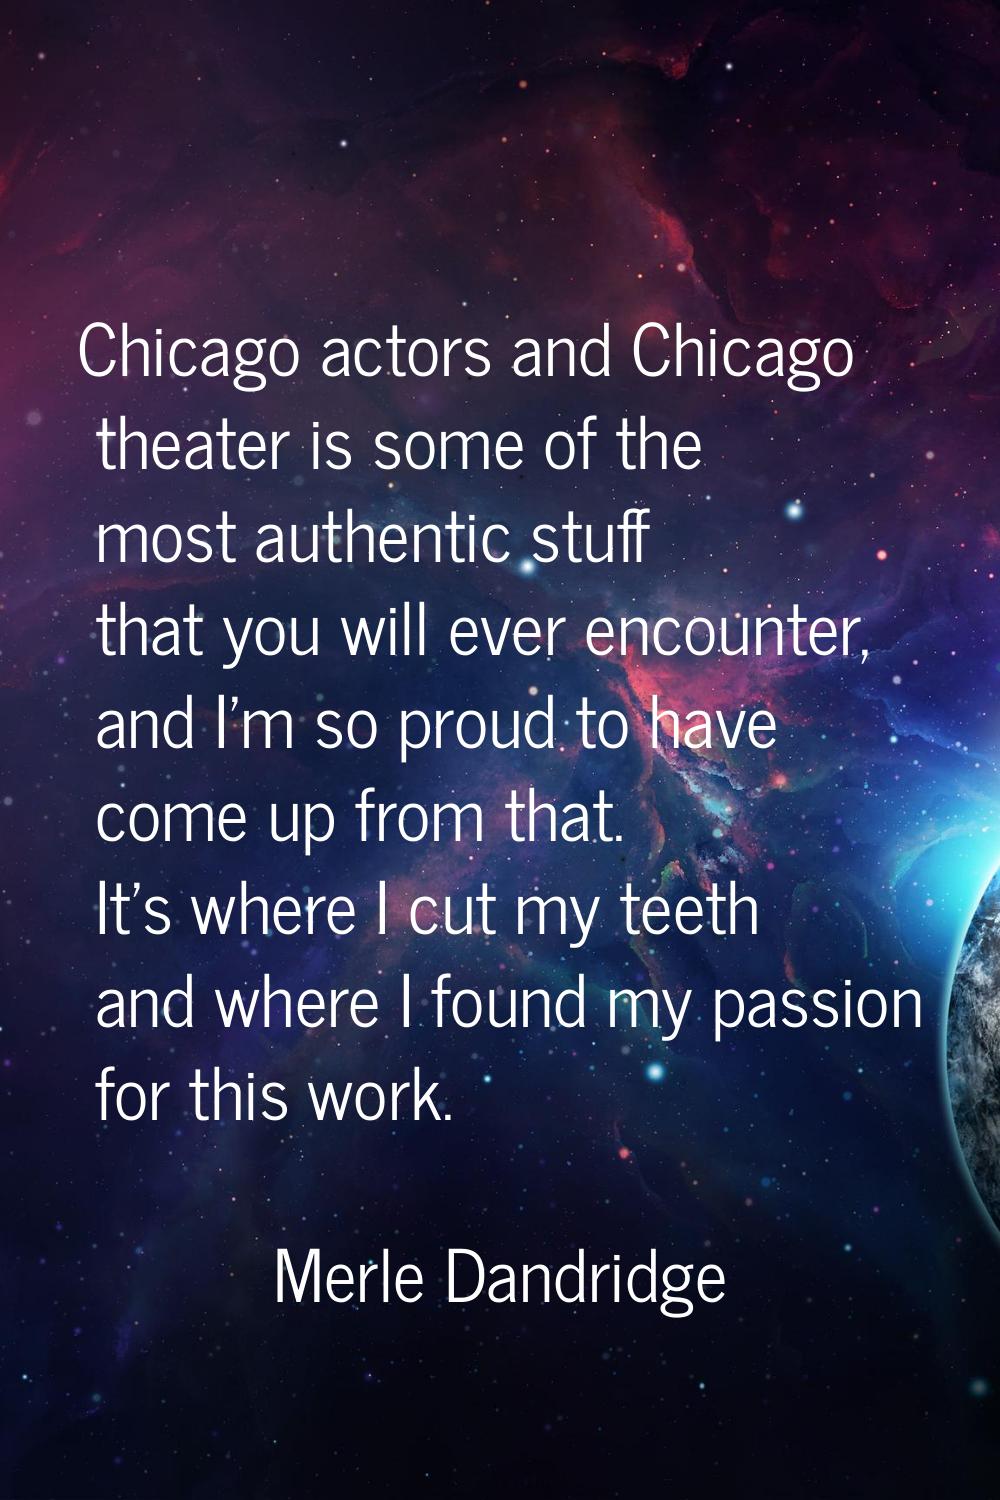 Chicago actors and Chicago theater is some of the most authentic stuff that you will ever encounter